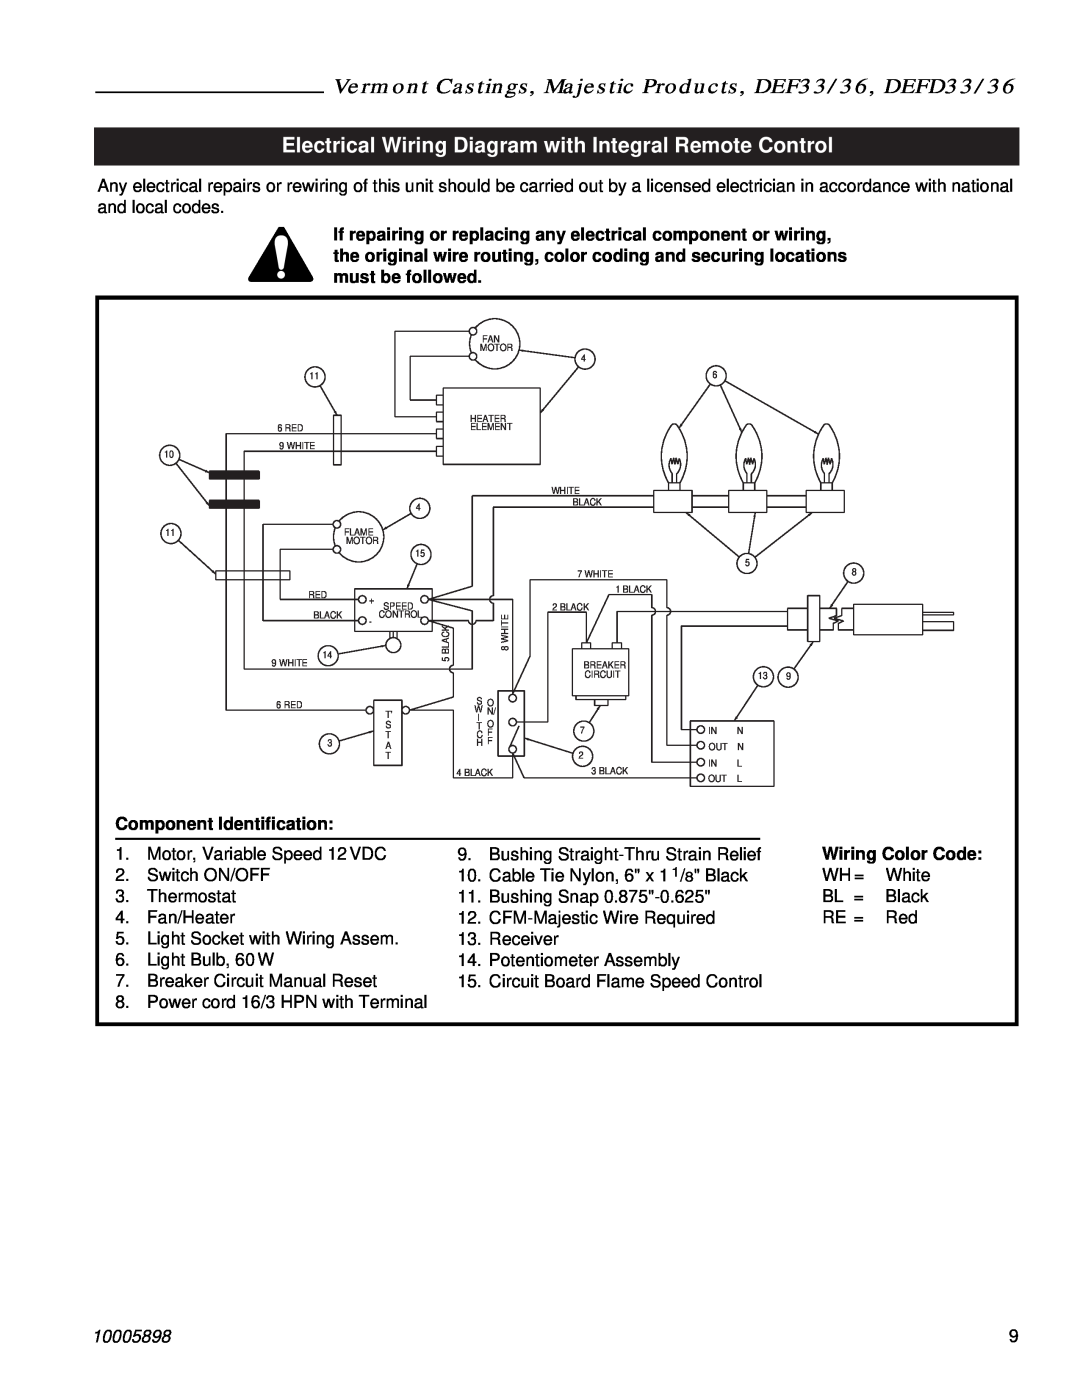 Vermont Casting DEF33, DEFD36 manual Component Identification, Wiring Color Code, 10005898 